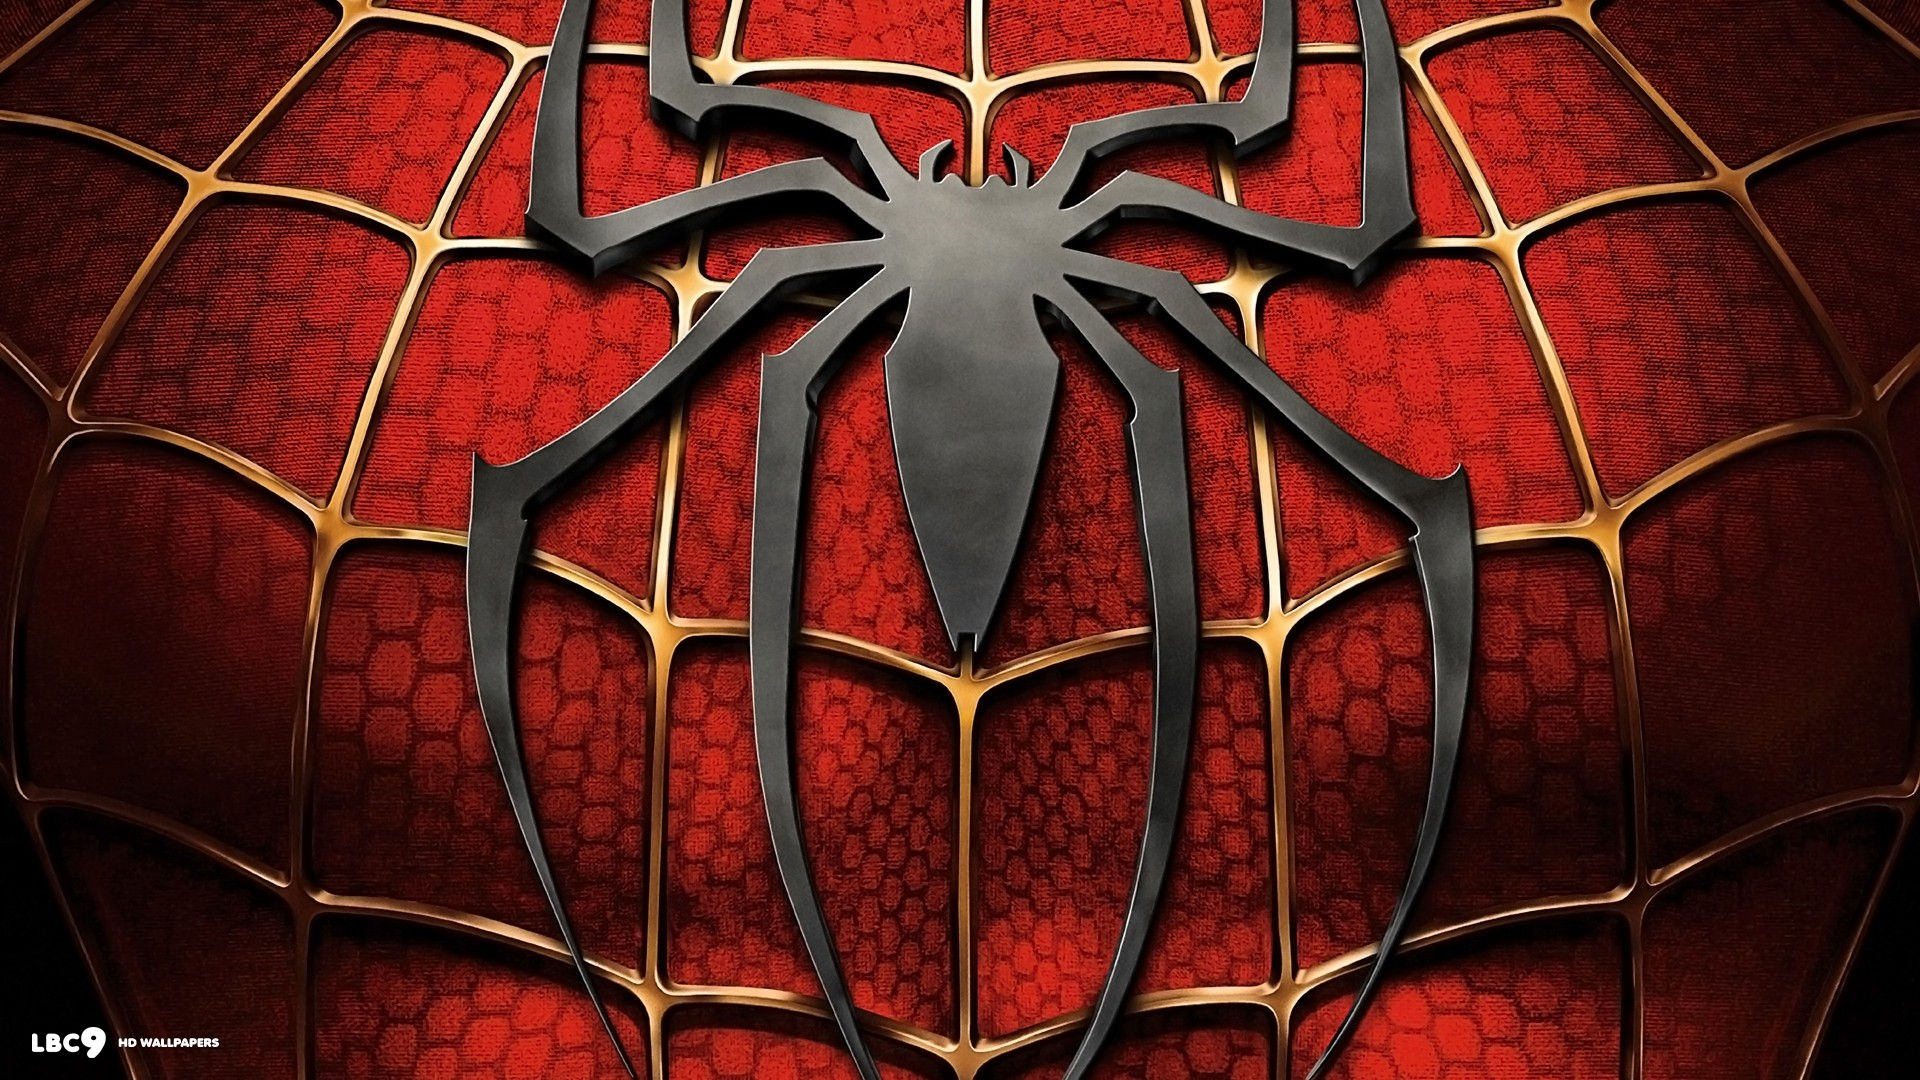 Spider man wallpaper 1 / 4 movie hd backgrounds